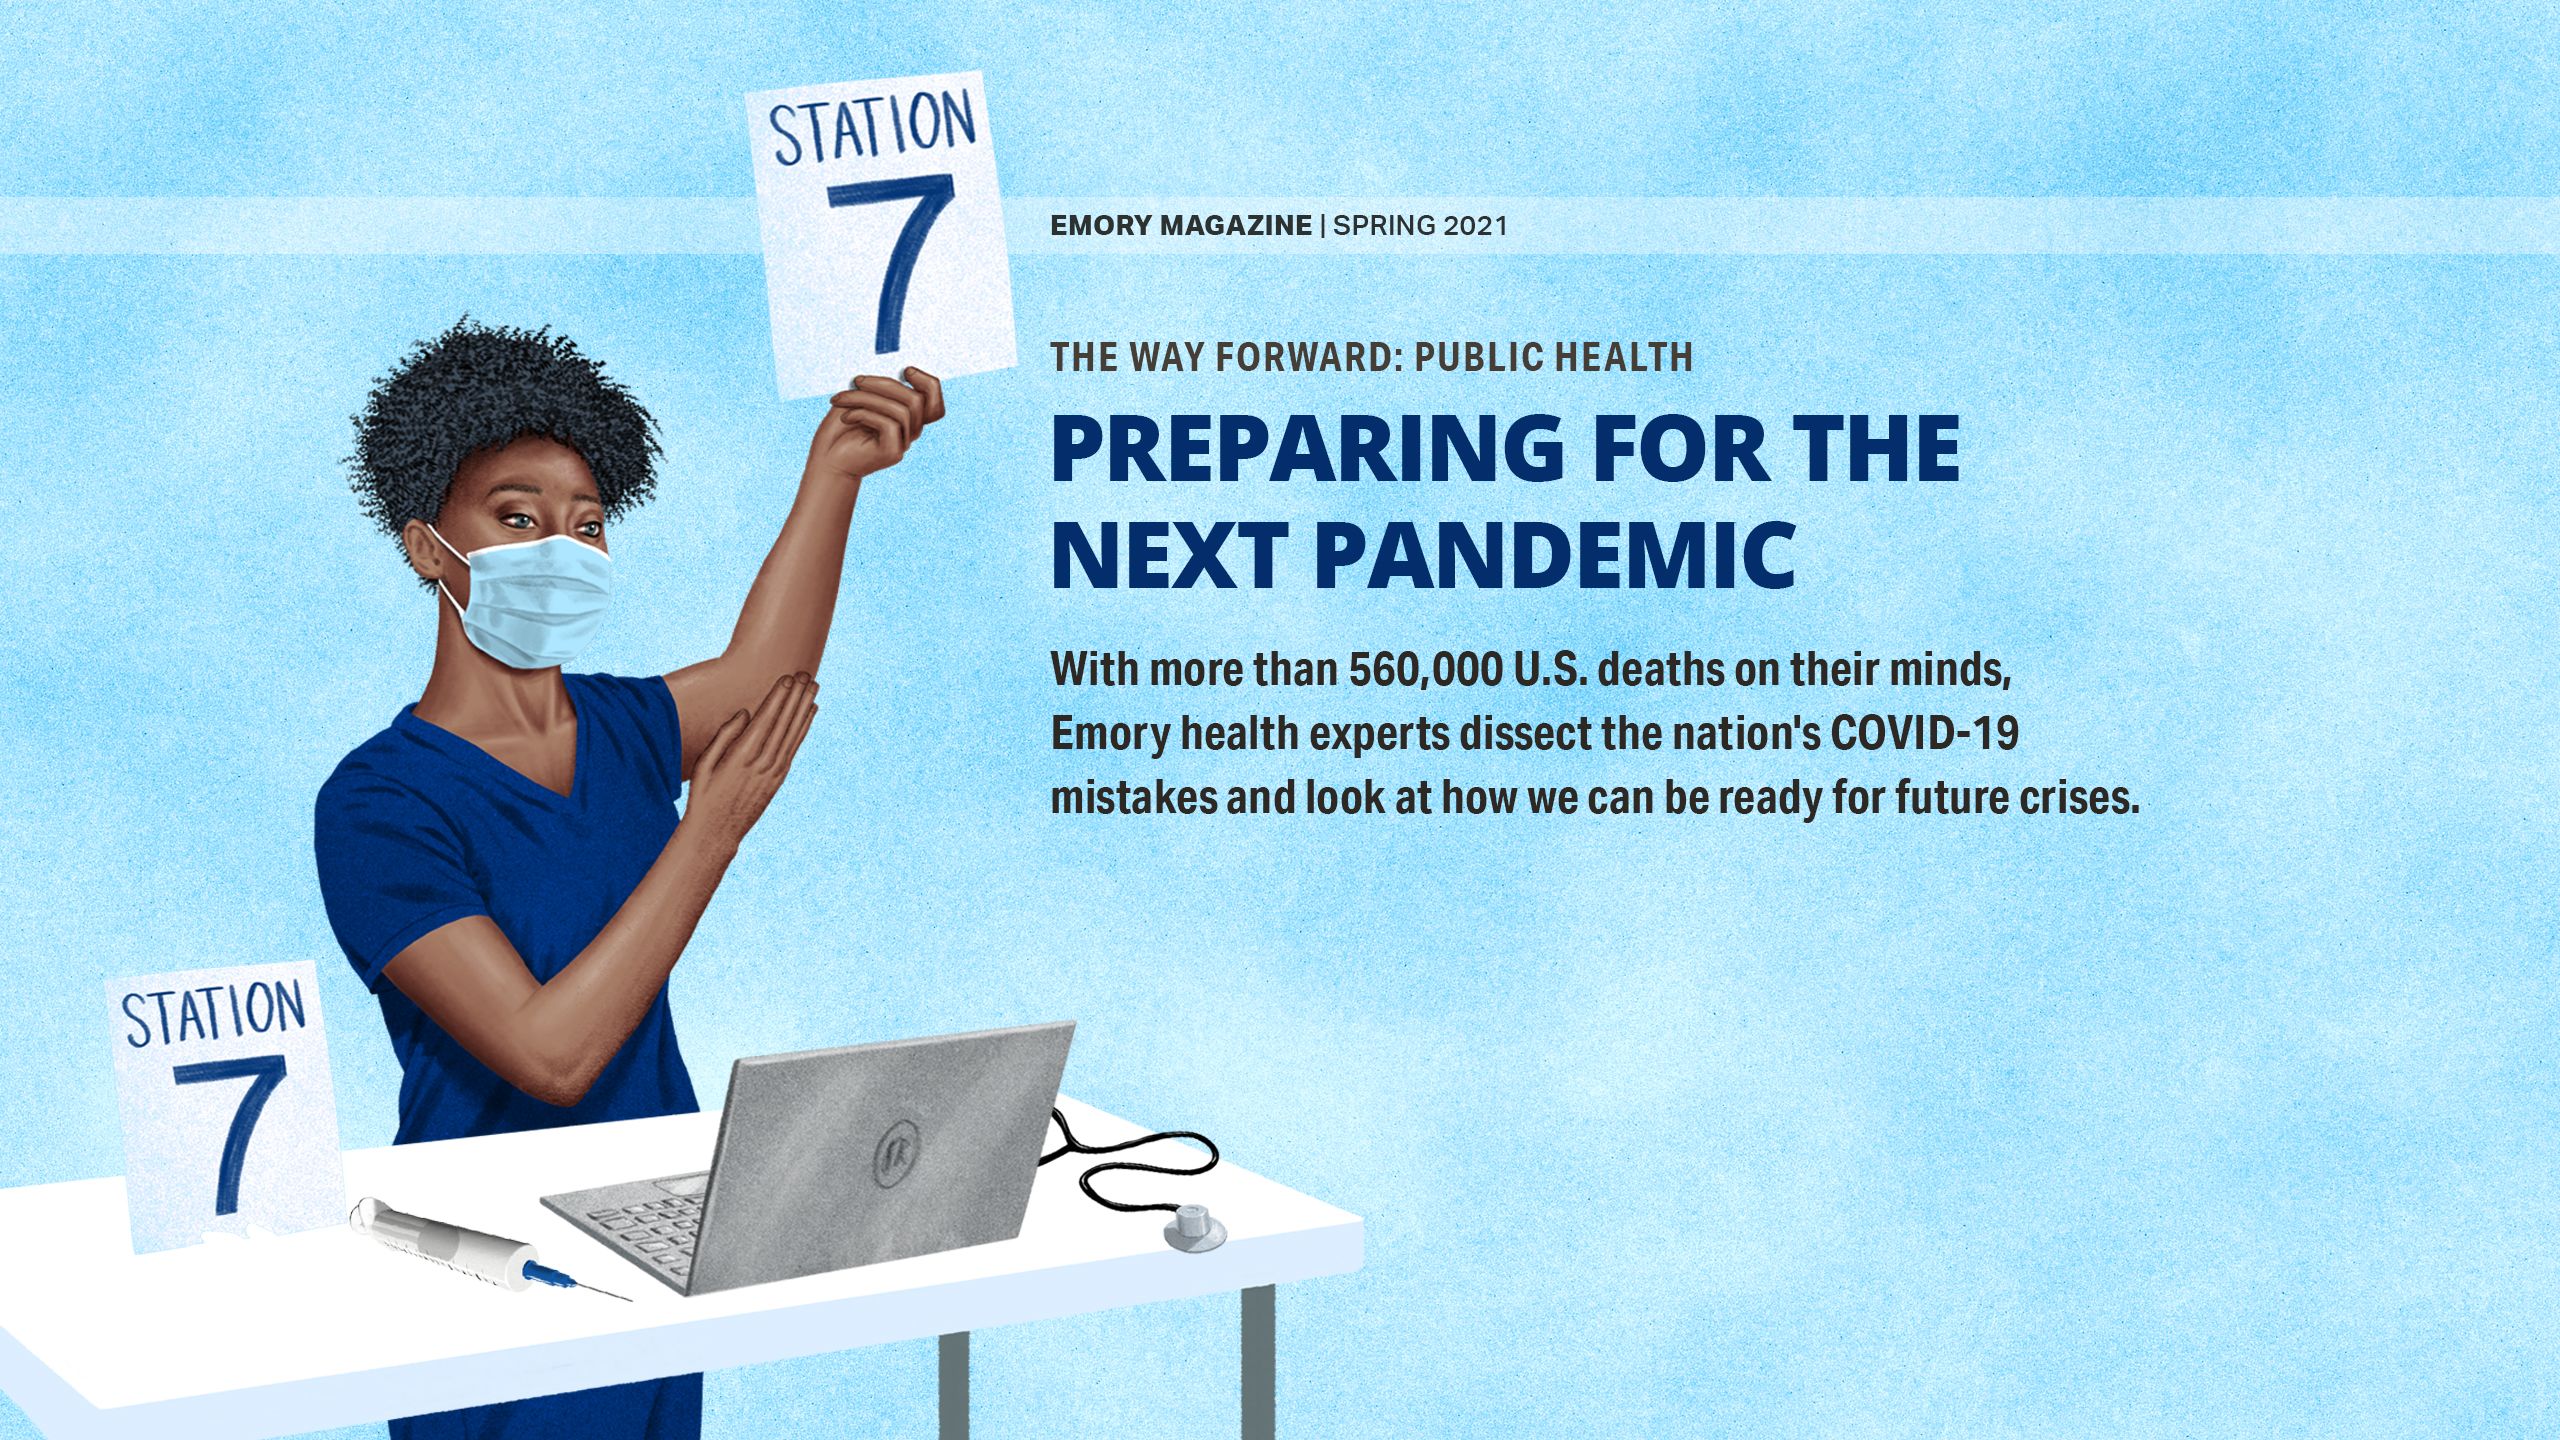 Preparing for the Next Pandemic With more than 560,000 U.S. deaths on their minds, Emory health experts dissect the nation's COVID-19 mistakes and look at how we can be ready for future crises. 